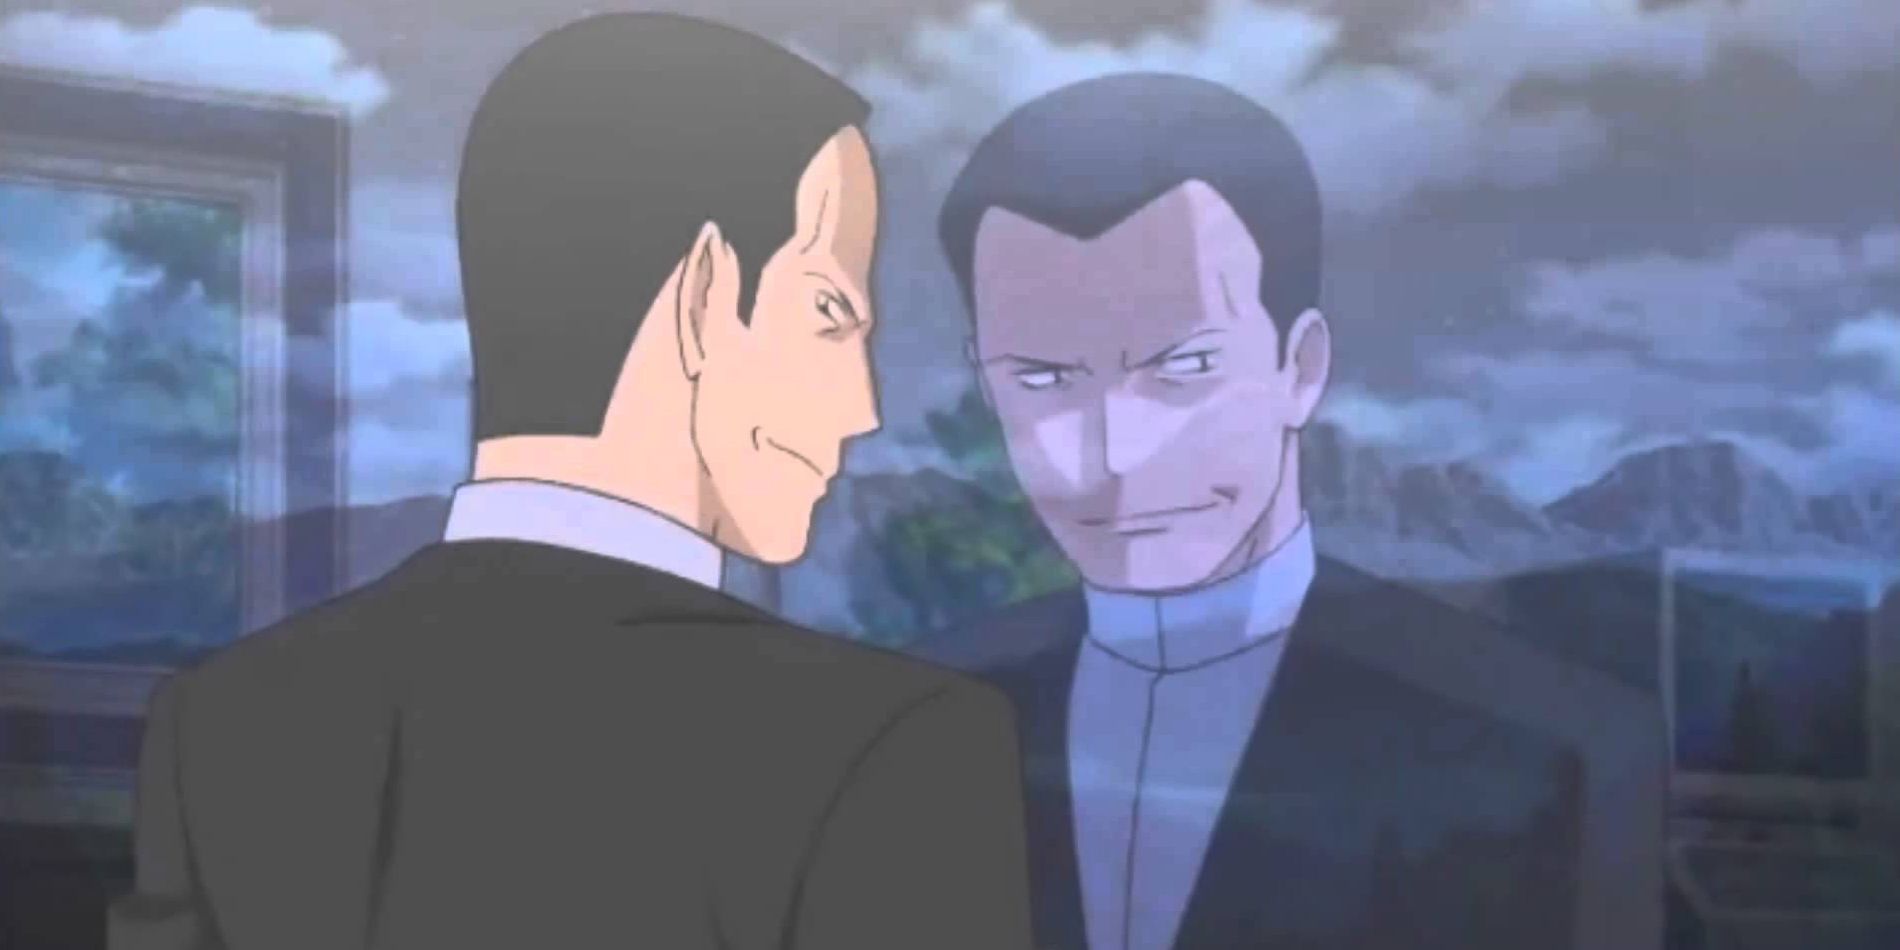 Giovanni looking out a window in Pokémon Origins